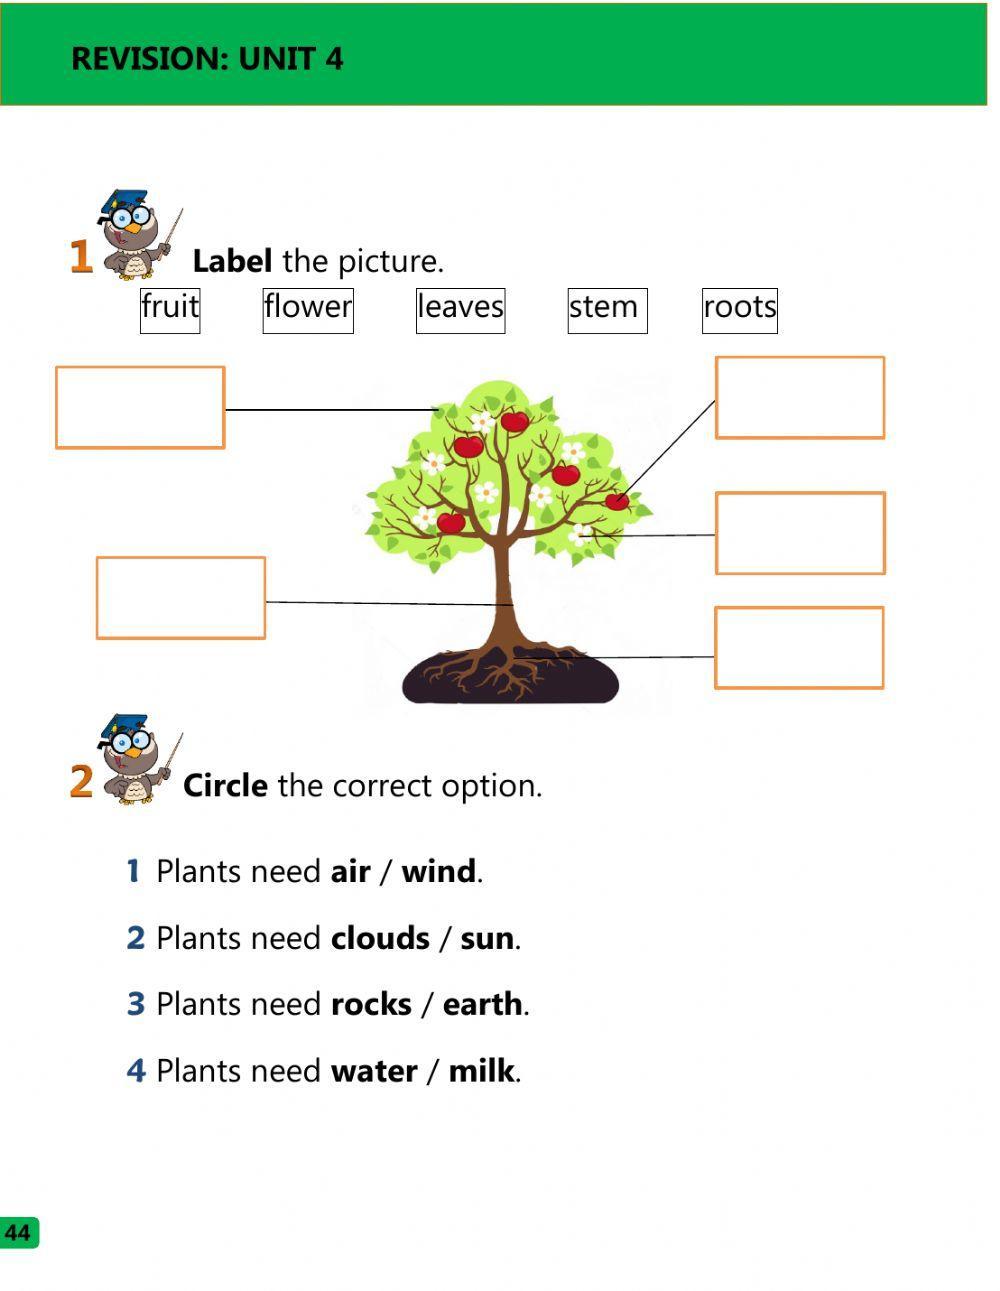 What plants need and parts of the plant